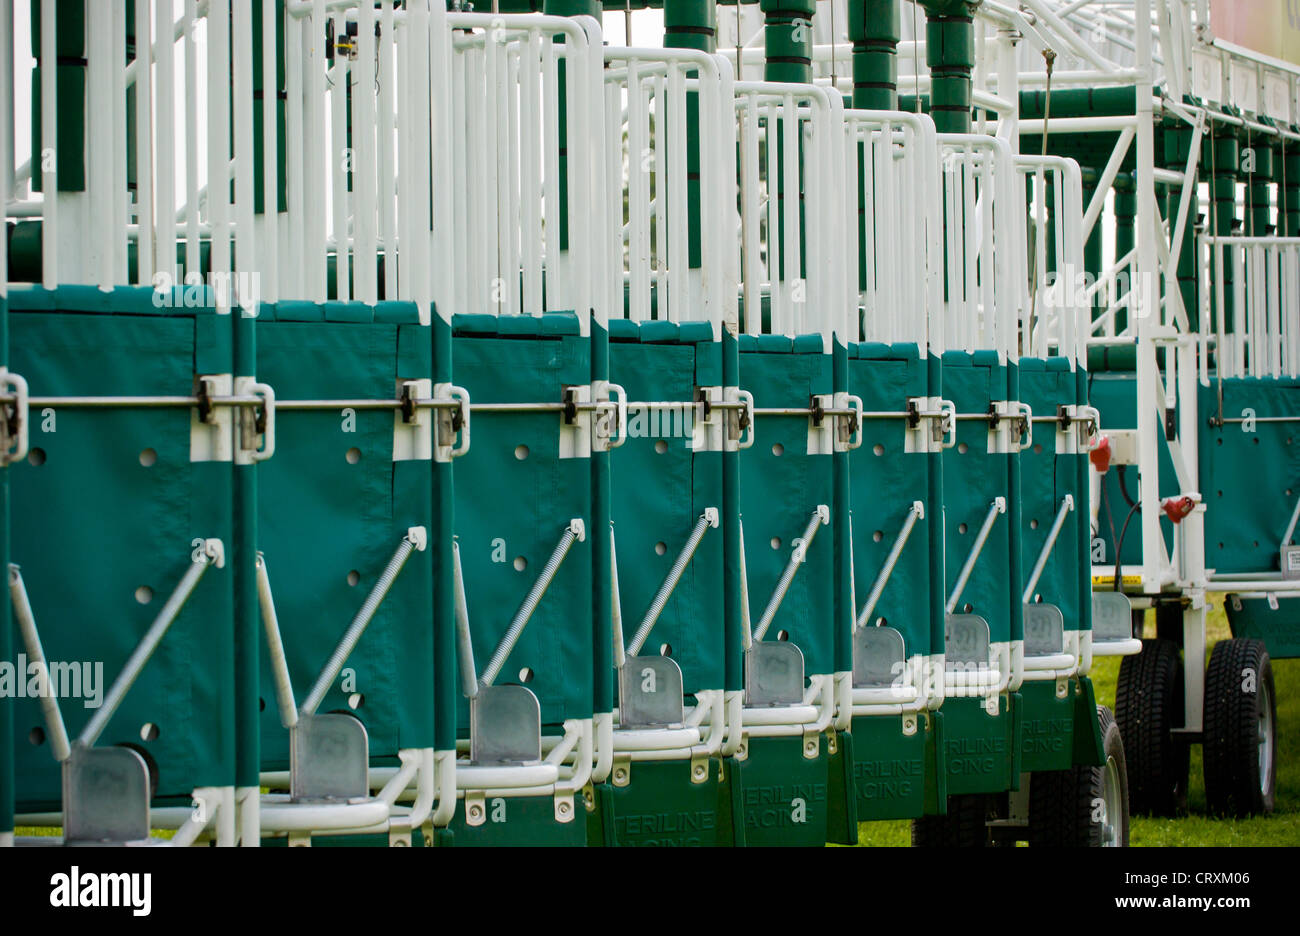 Empty Starting gates for horse racing Stock Photo